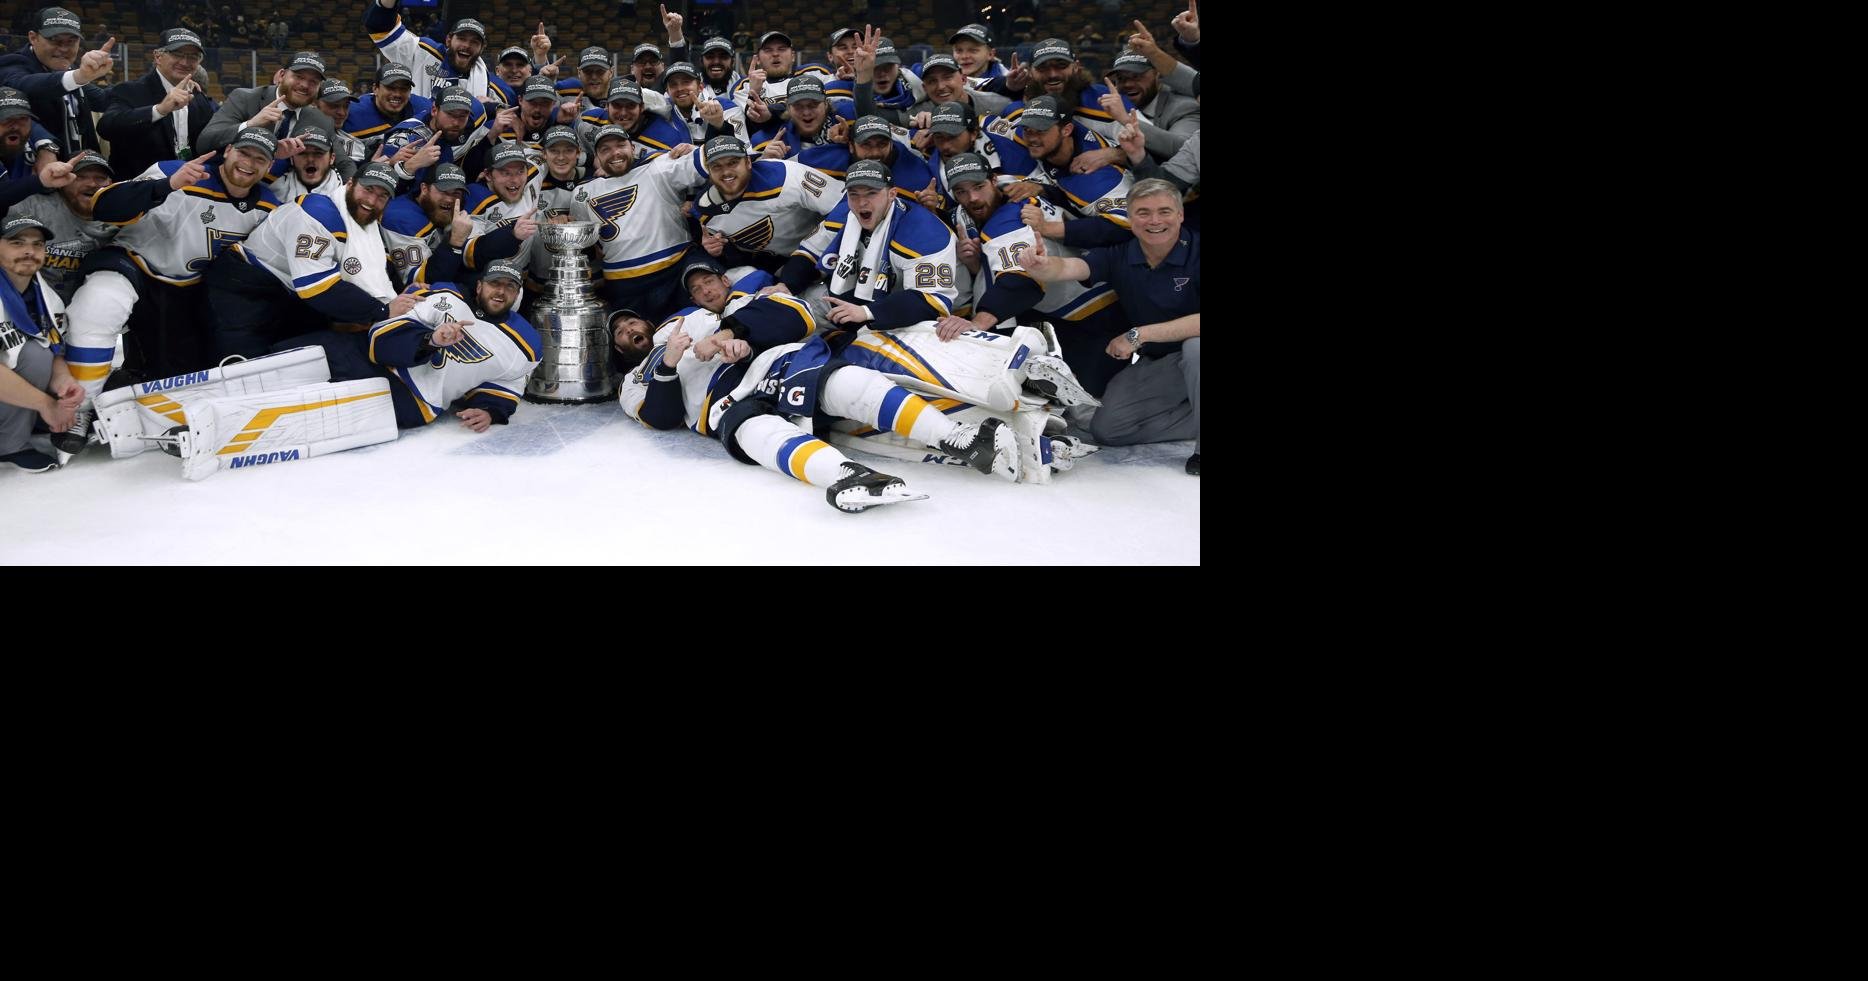 Photos St. Louis Blues win first Stanley Cup championship